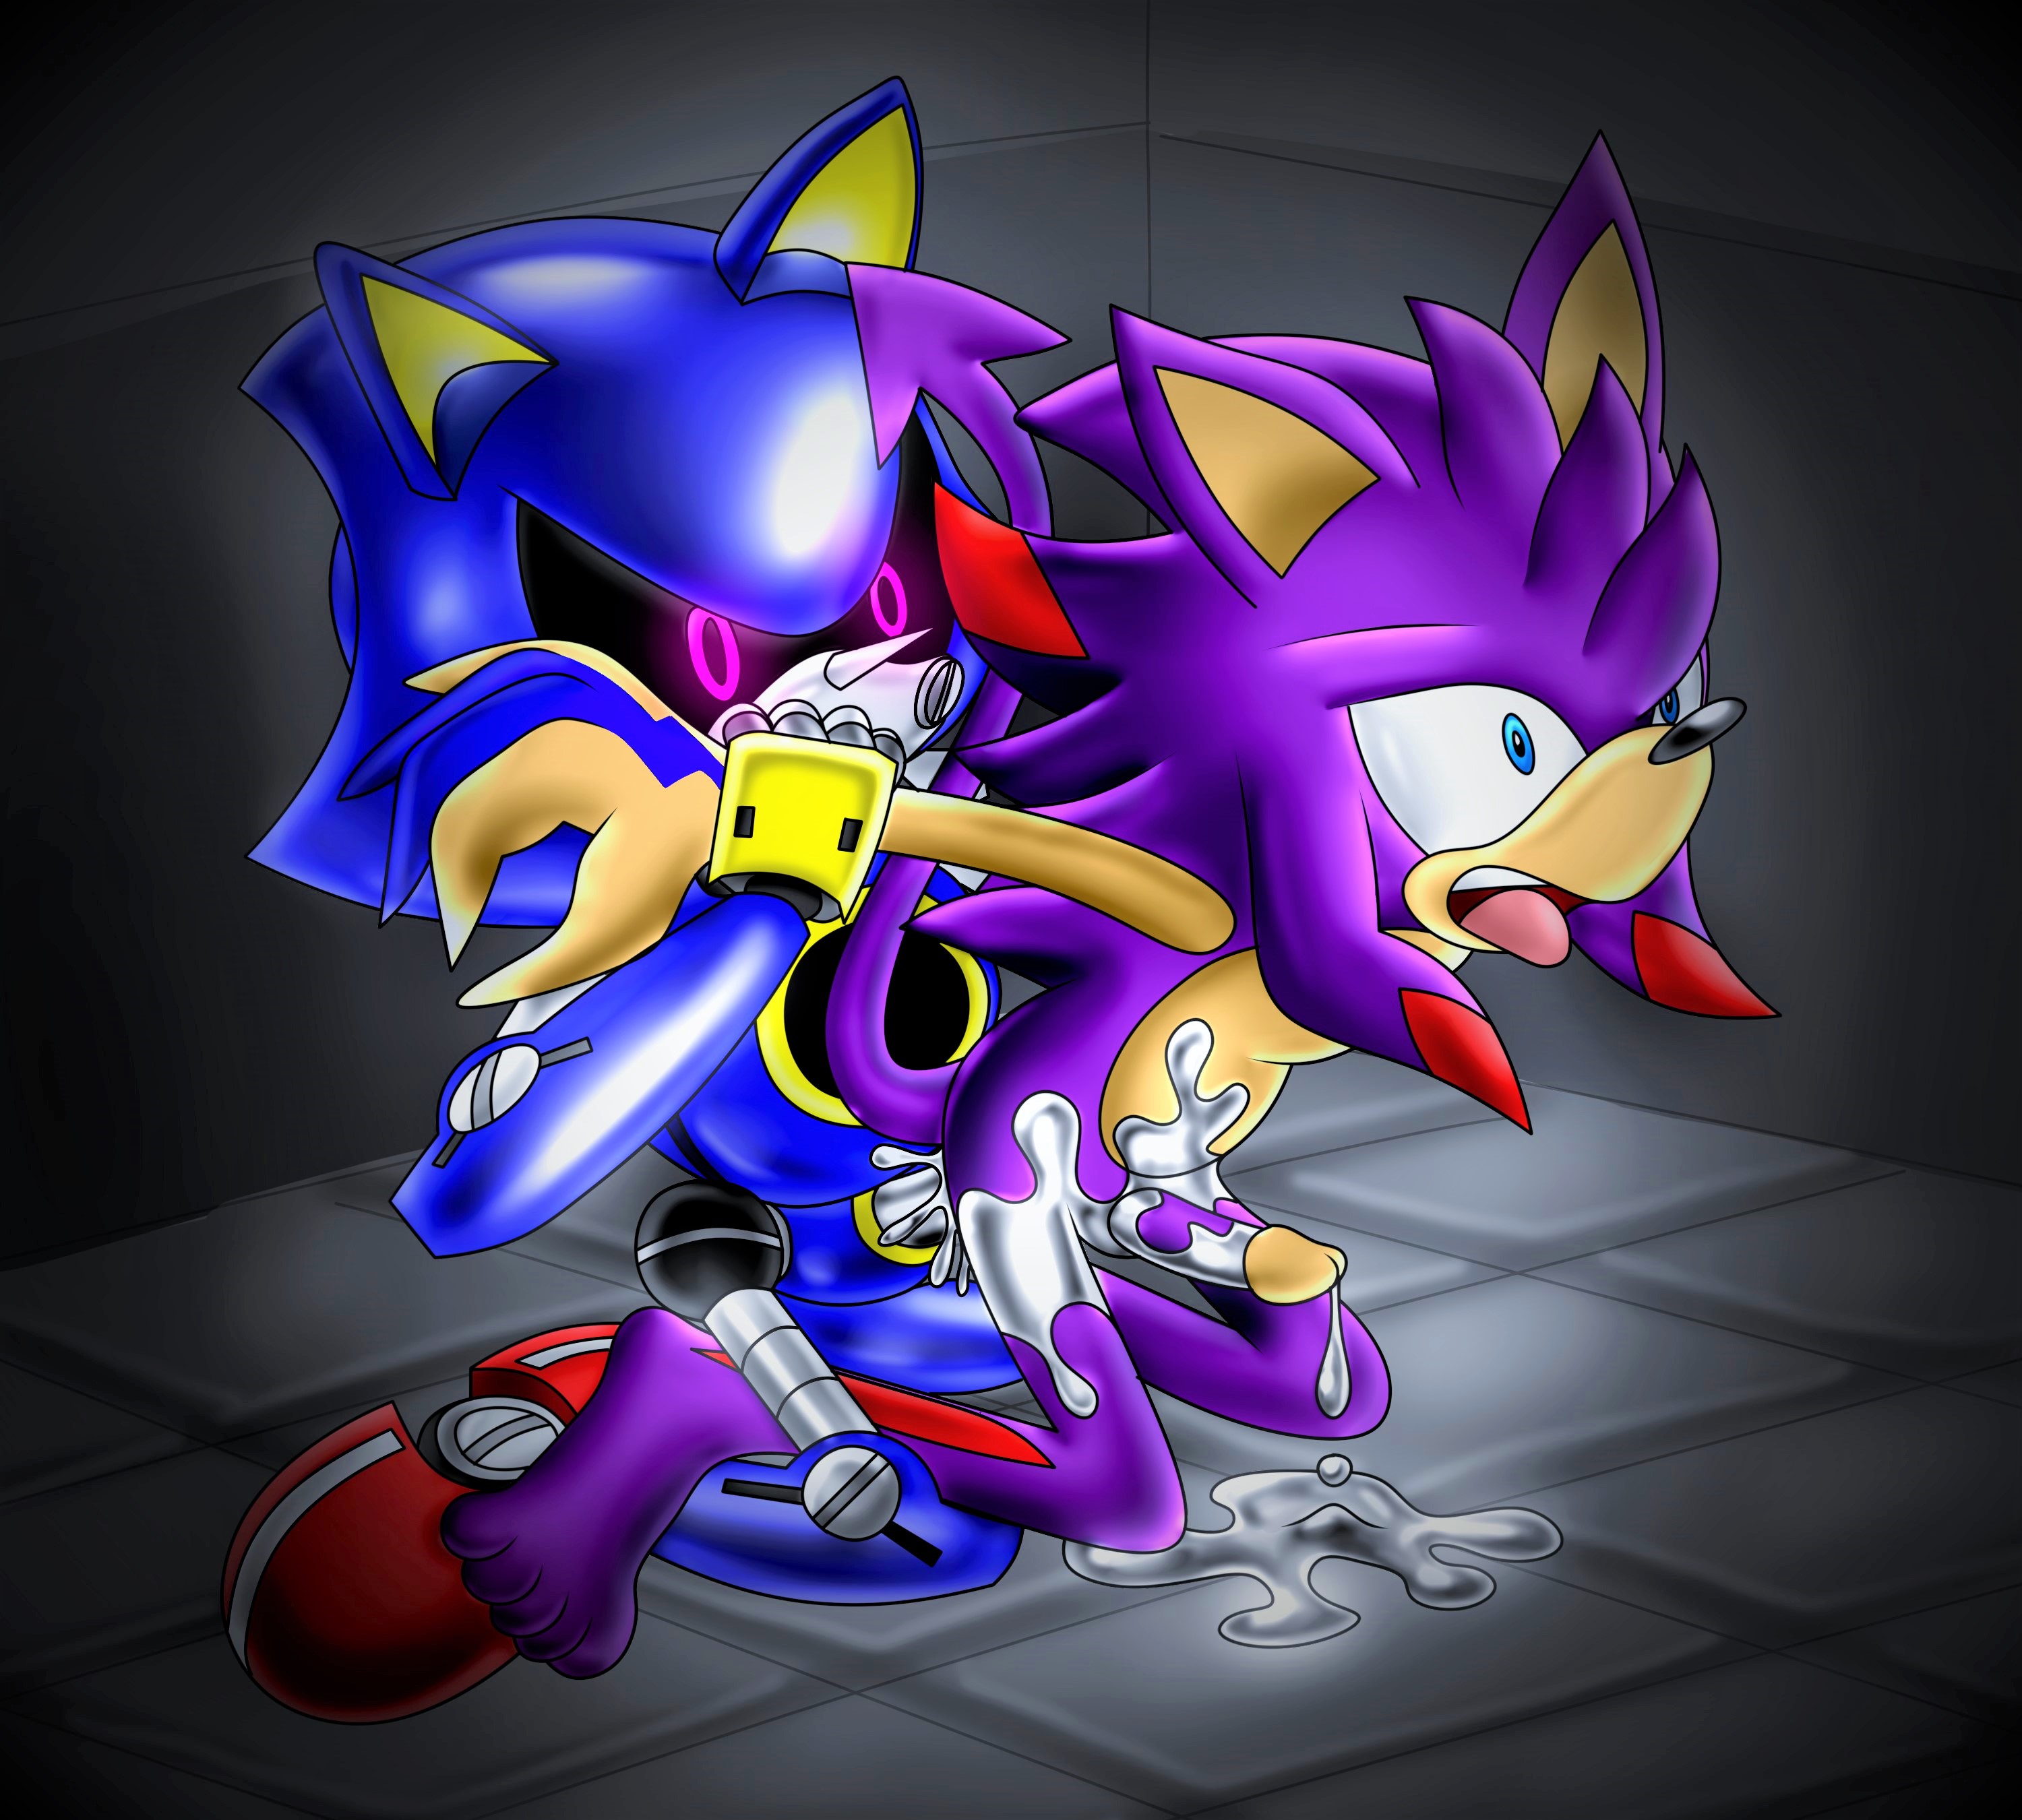 Metal sonic porn - 🧡 Sonic Porn thread Image limit reached, time for anoth...